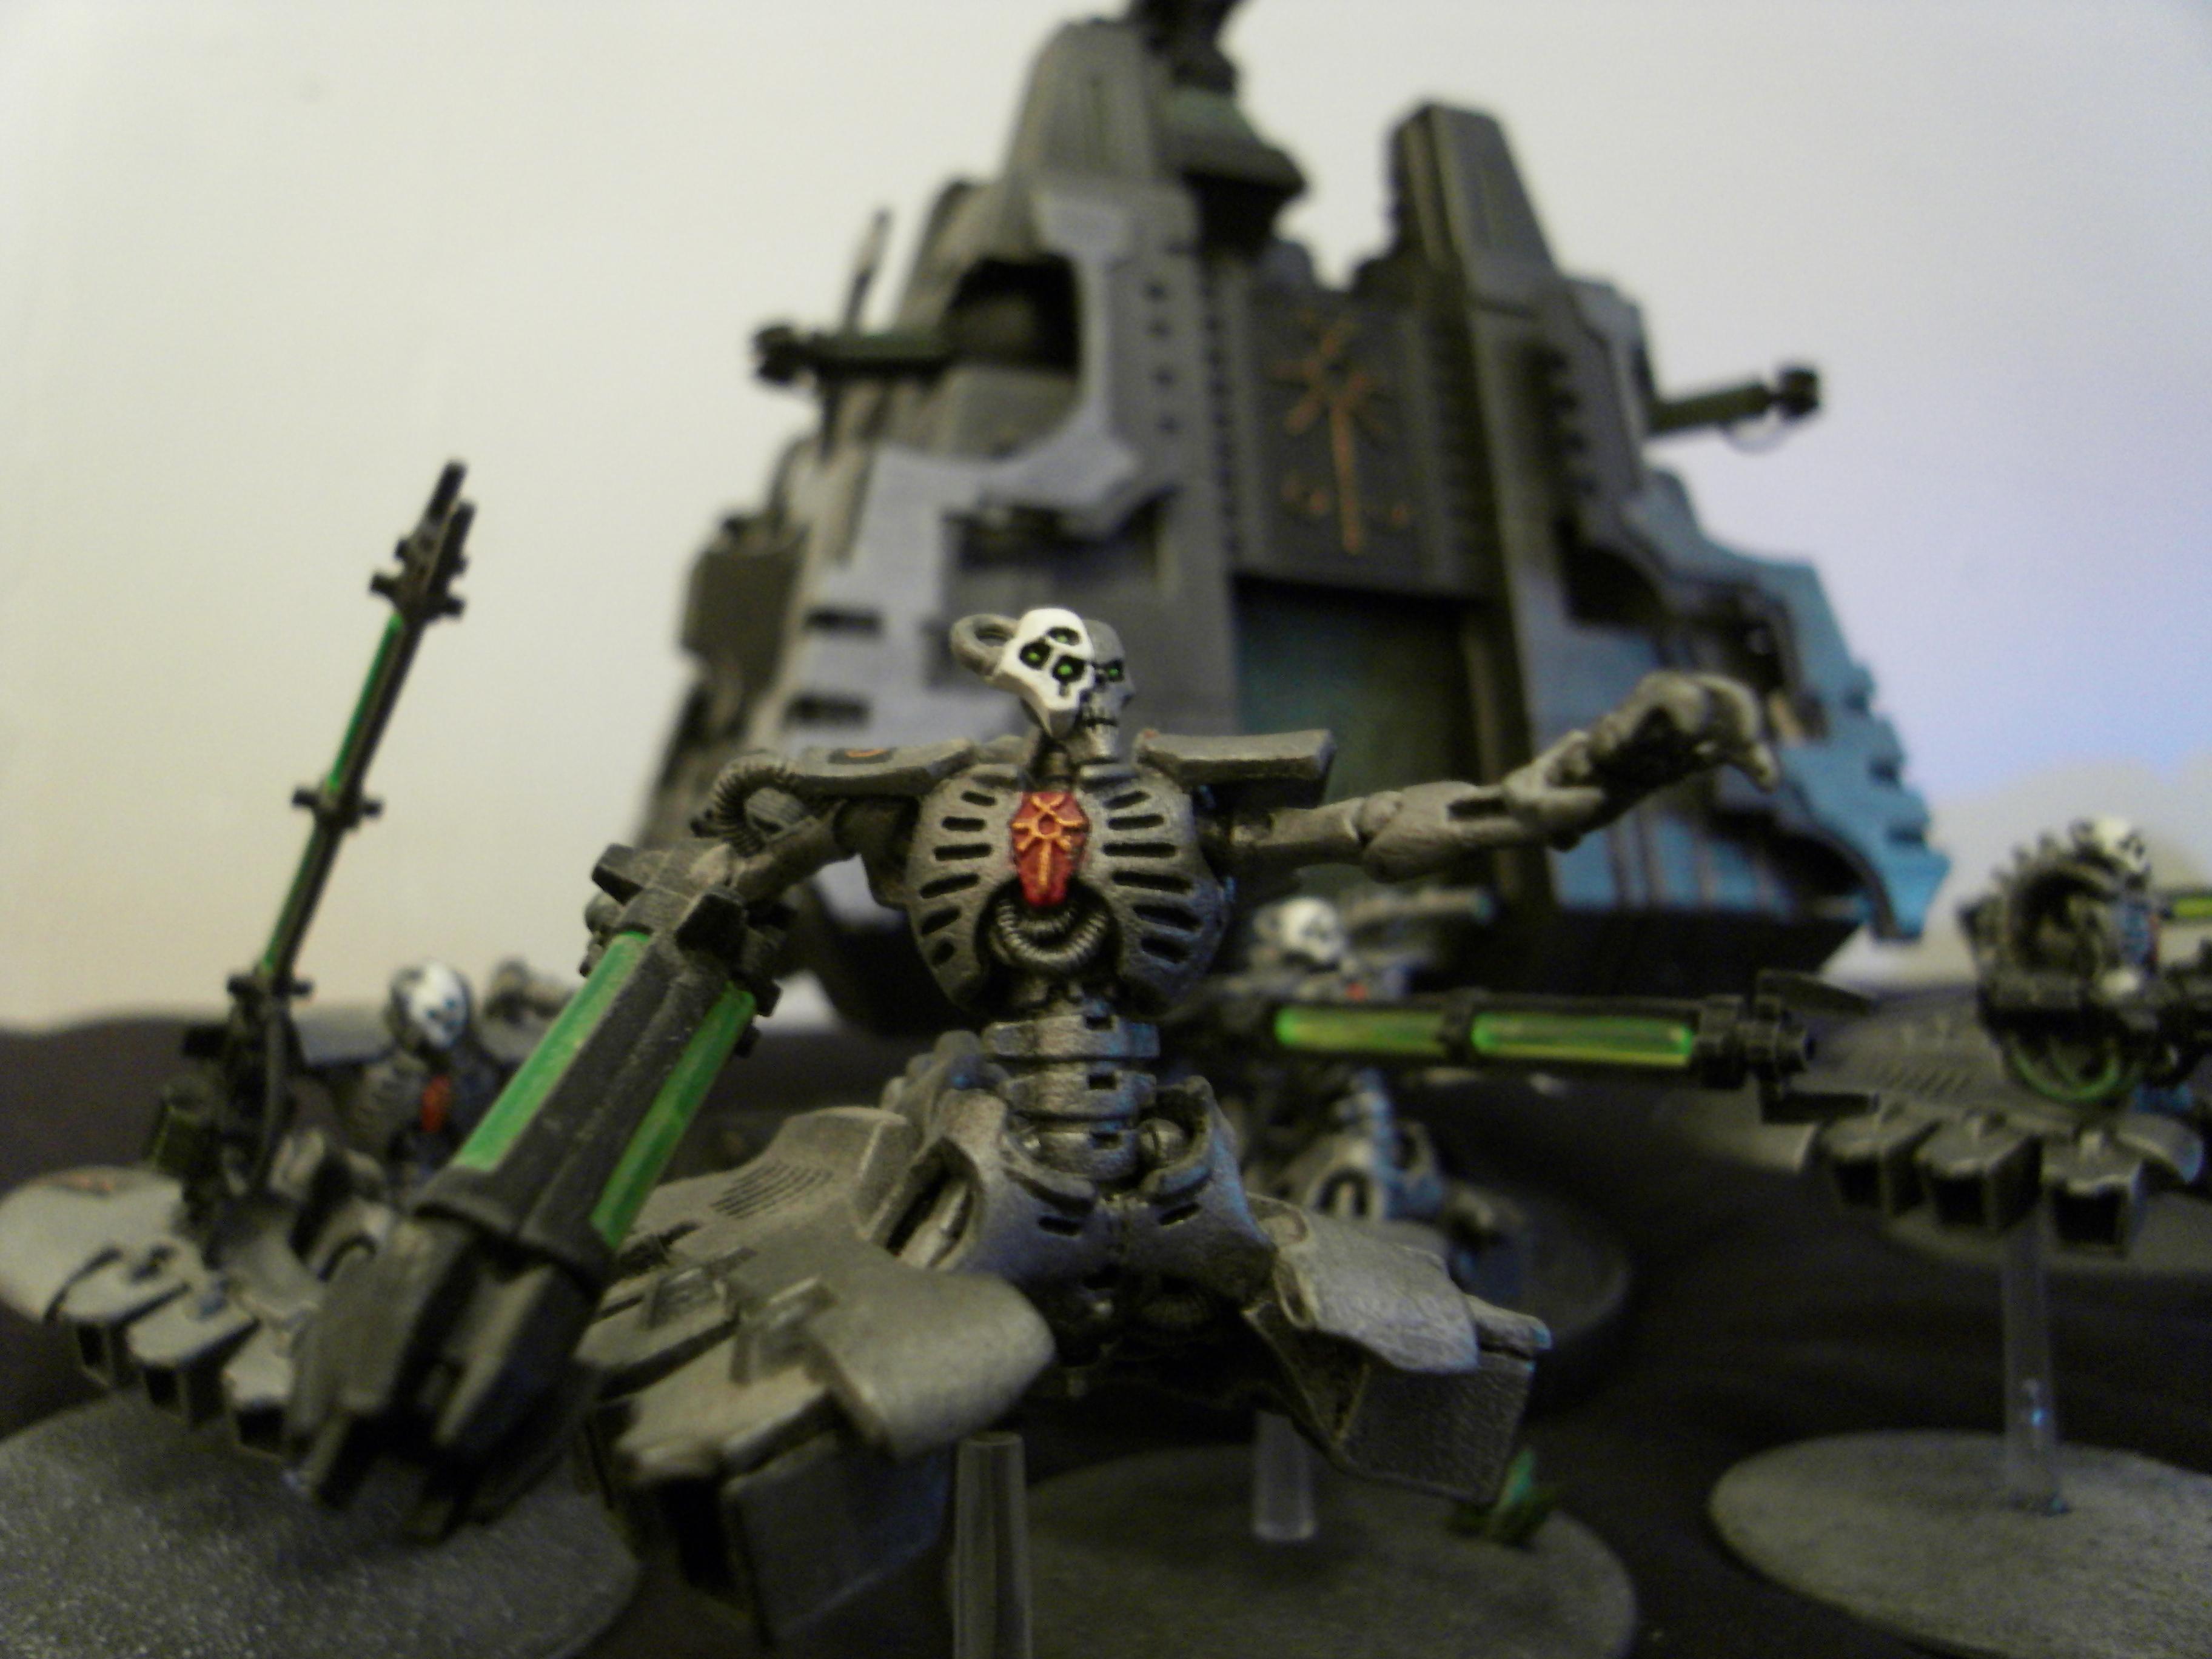 Army, Command Barge, Conversion, Destroyer, Immortals, Lord, Monolith, Necrons, Scarabs, Warhammer 40,000, Warhammer Fantasy, Warriors, Wraiths